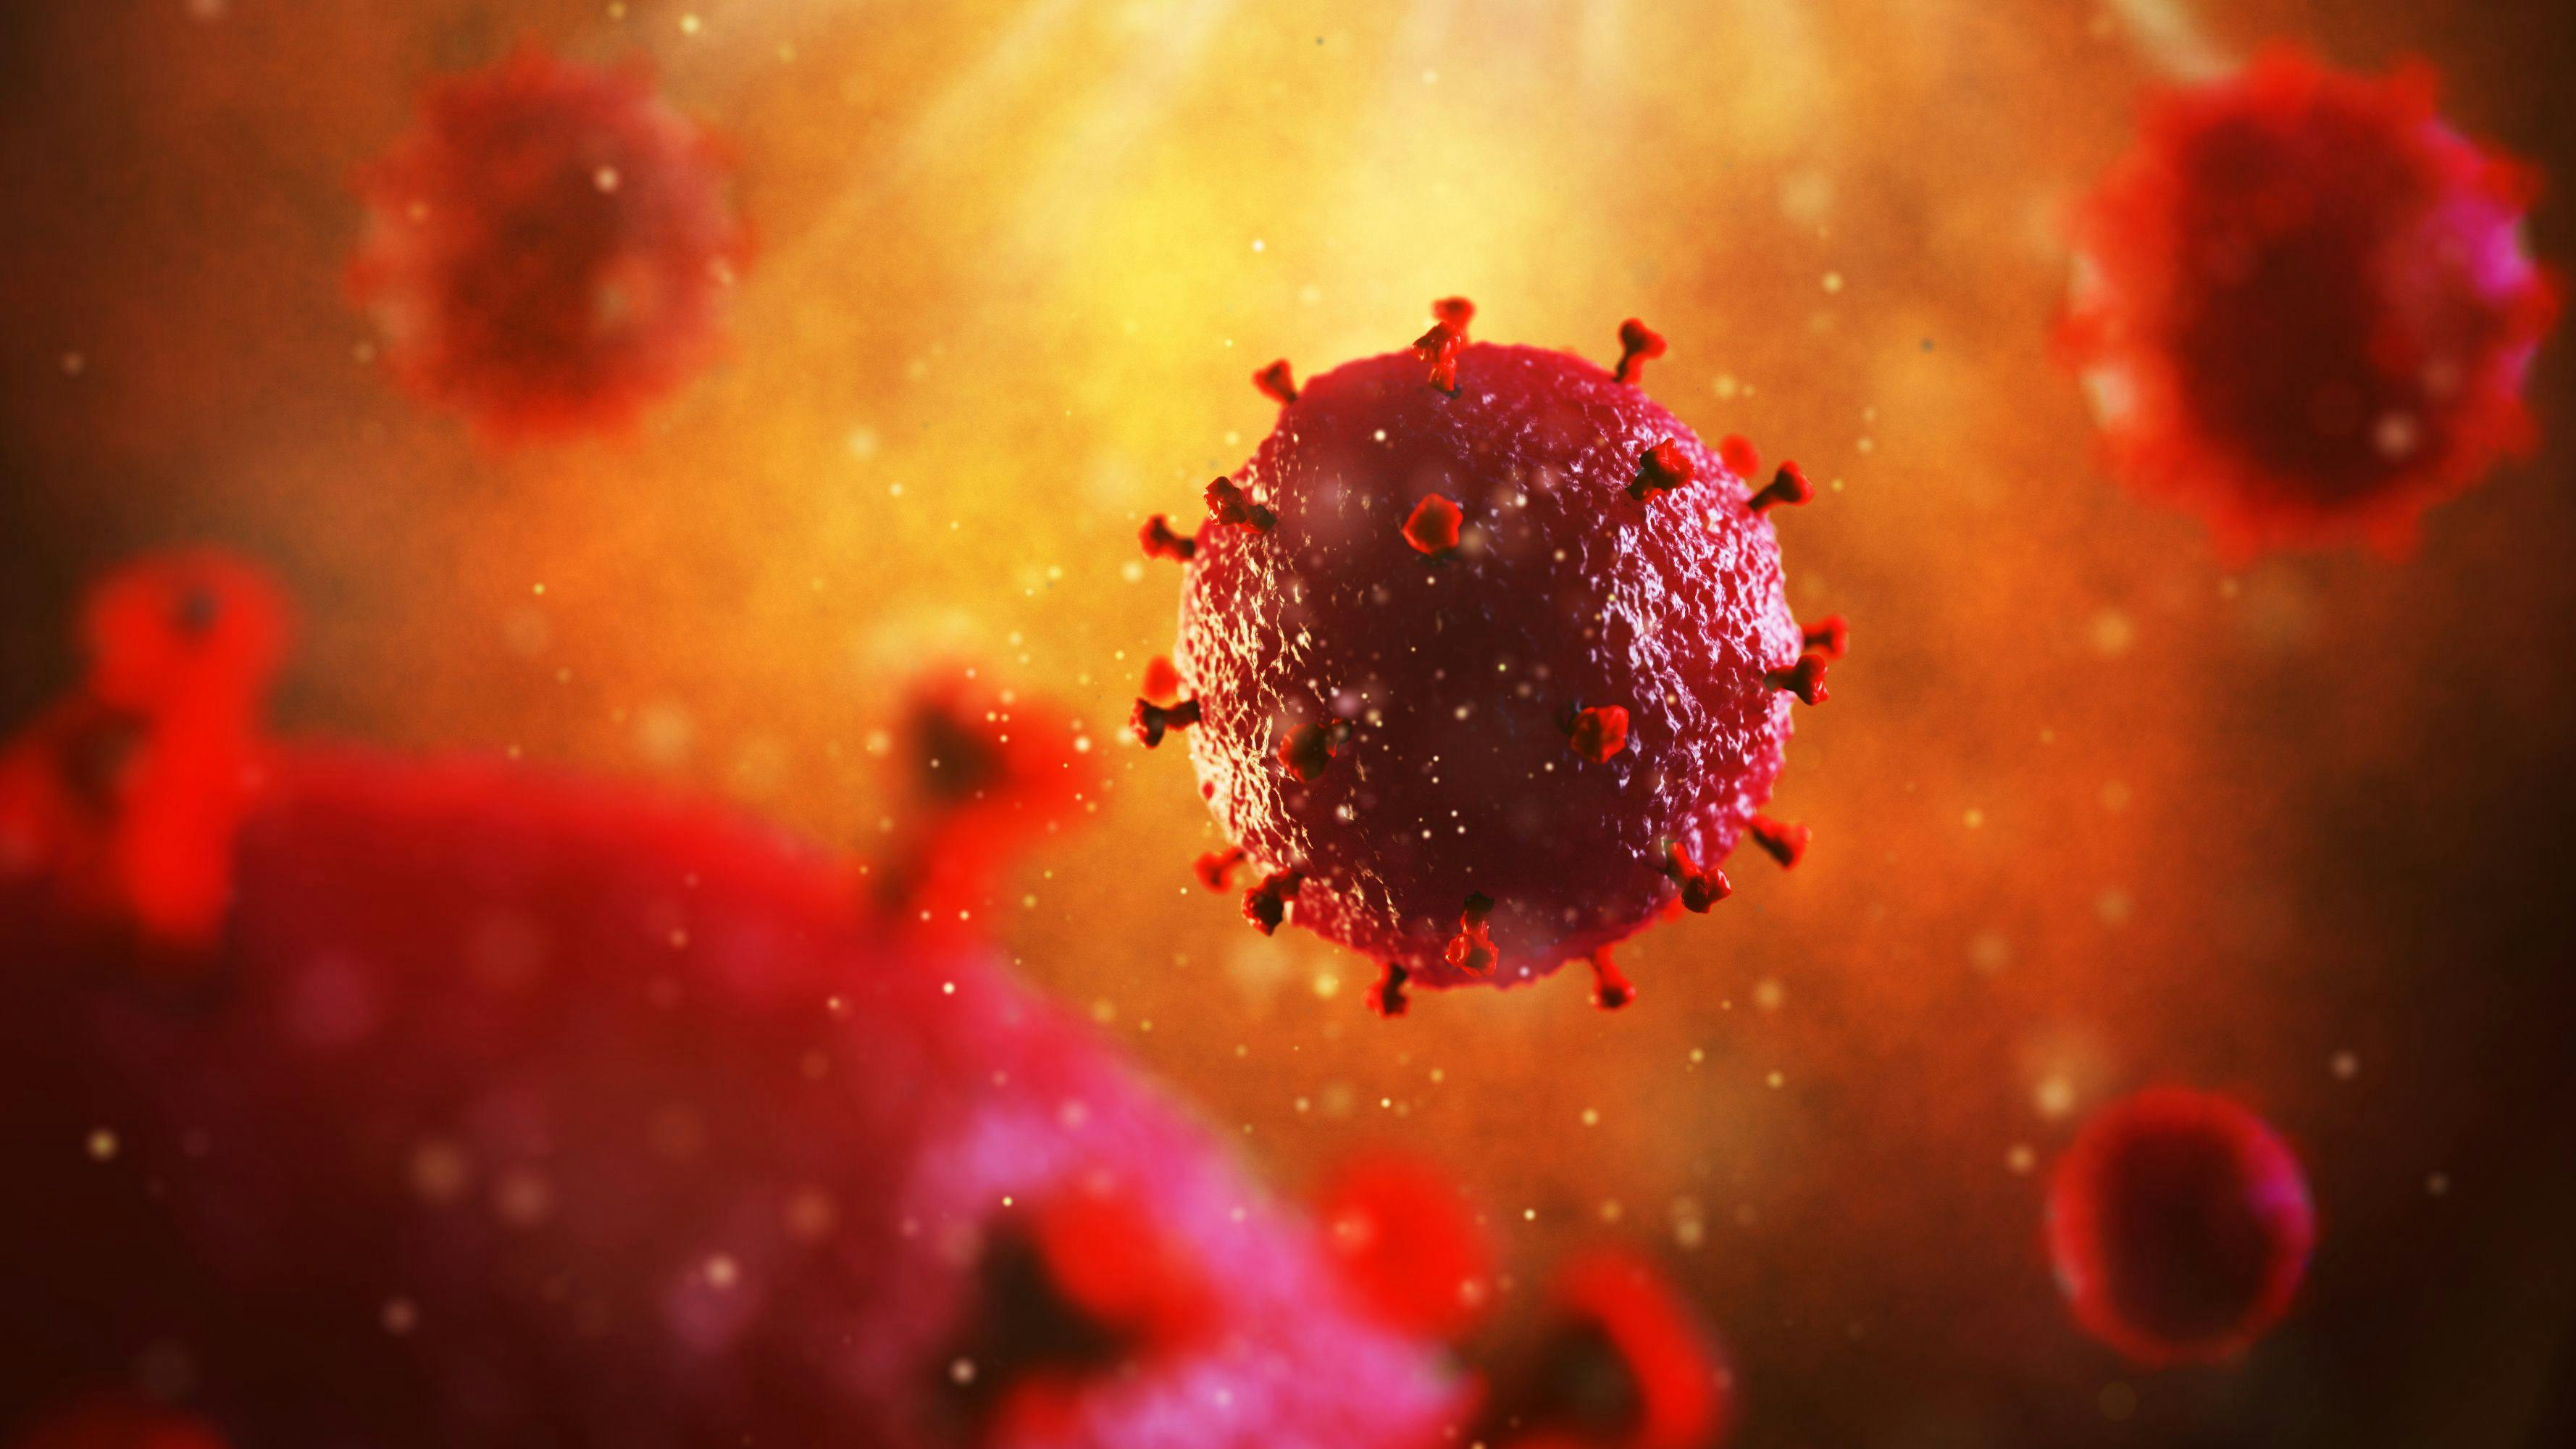 Patients with Liver Cancer and Hepatitis or HIV May Face Higher Mortality Rates